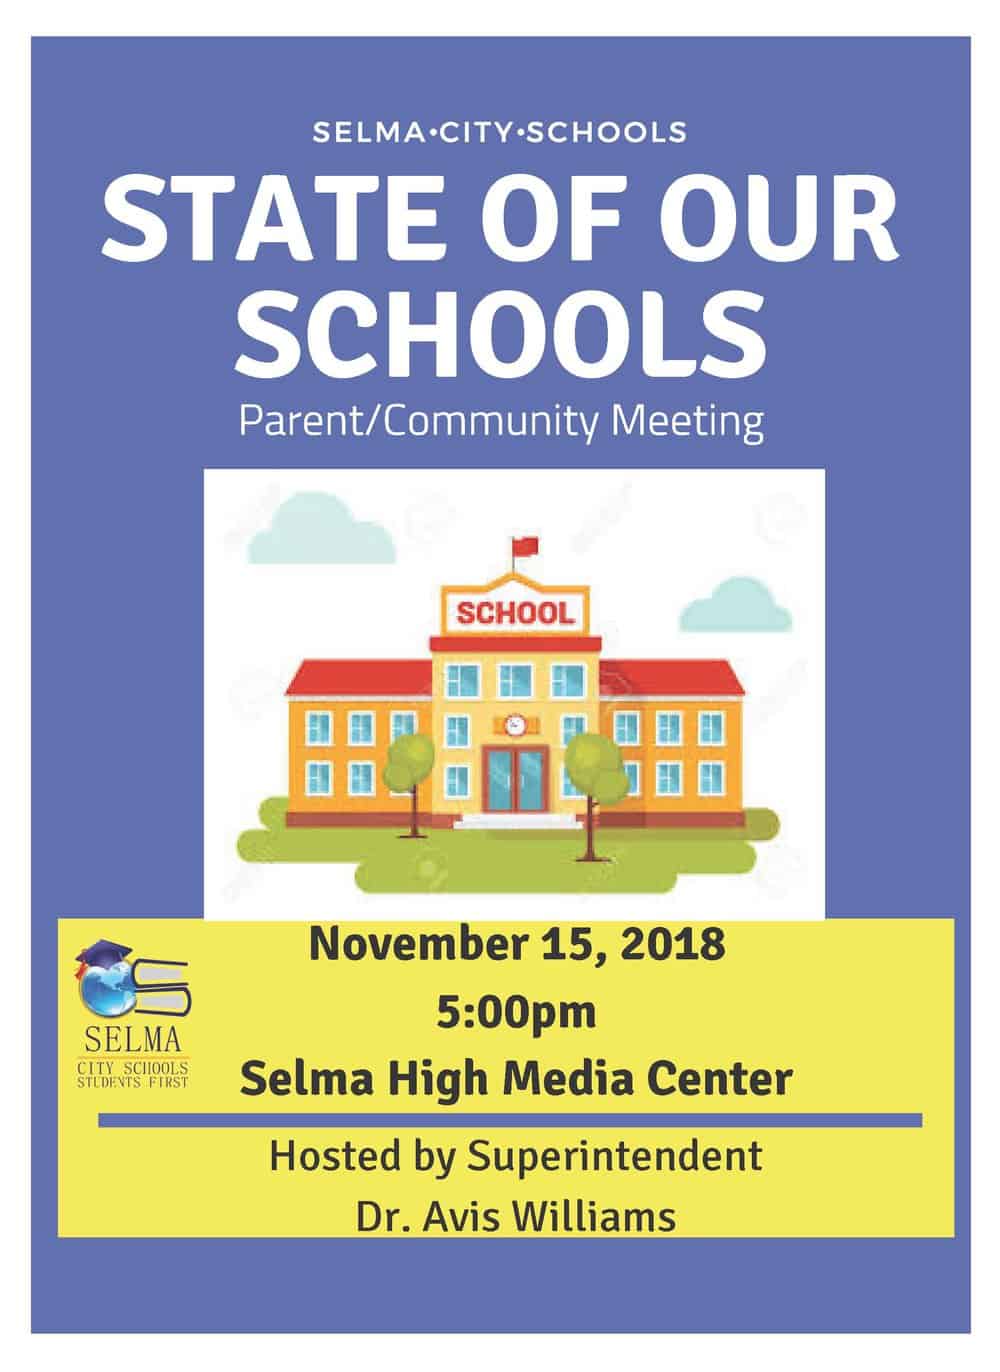 State of our schools flyer